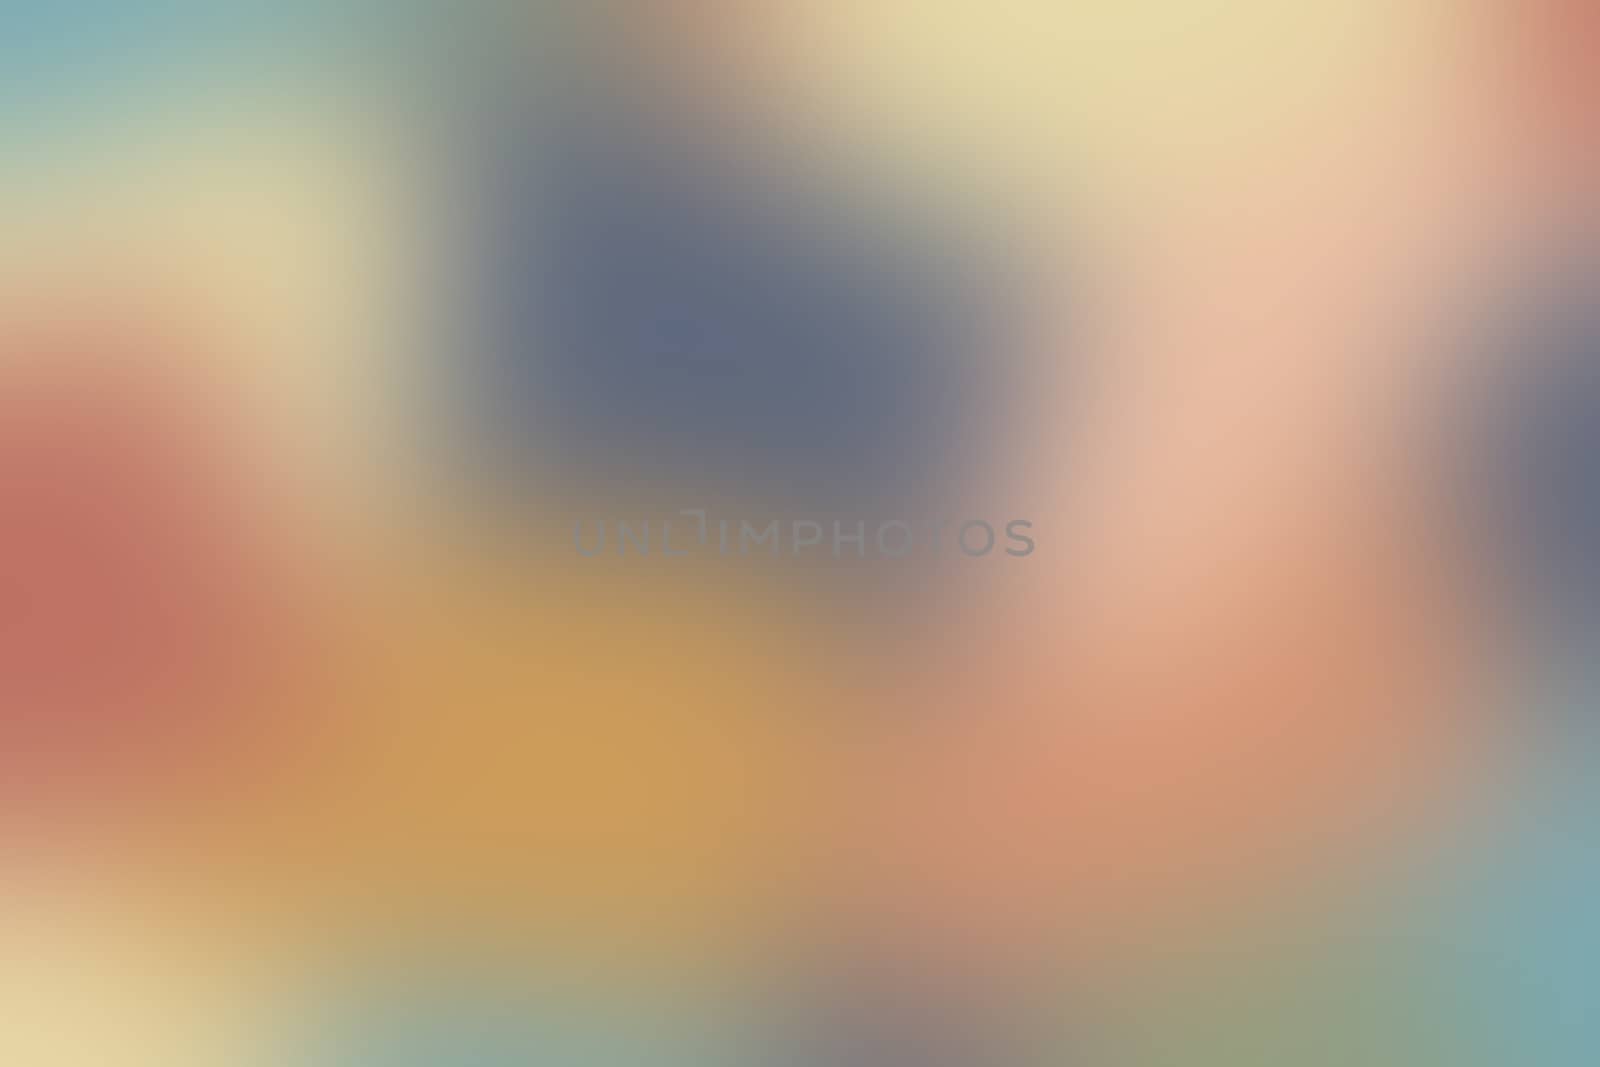 blurred gradient hue colorful pastel soft background illustration for cosmetics banner advertising background